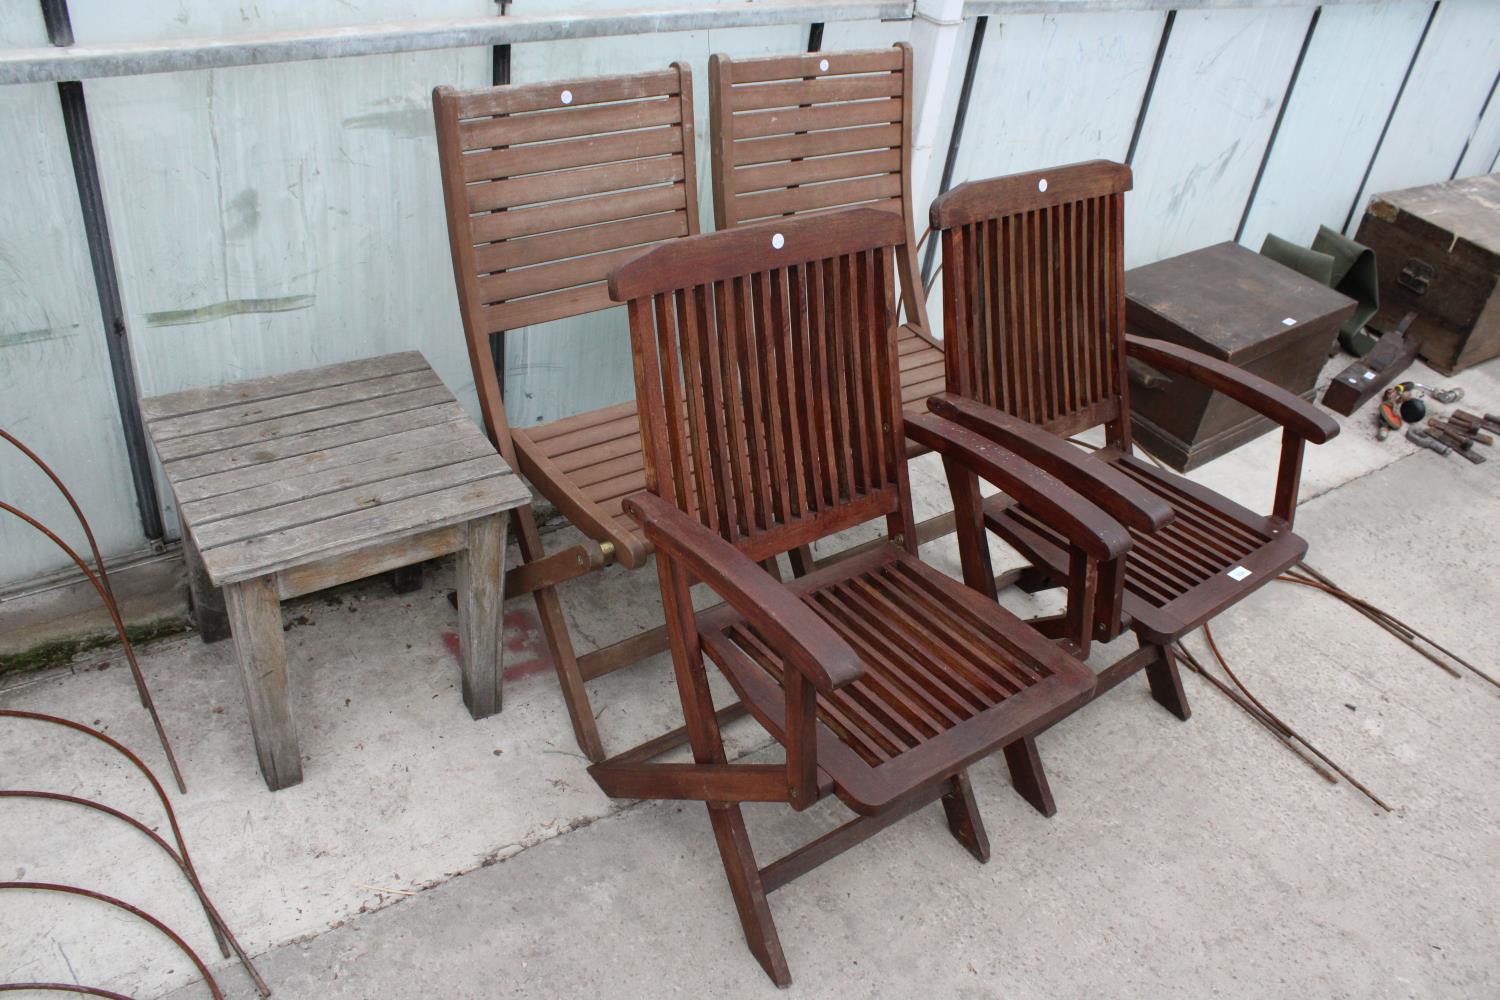 TWO PAIRS OF TEAK FOLDING CHAIRS AND A WOODEN SLATTED TABLE